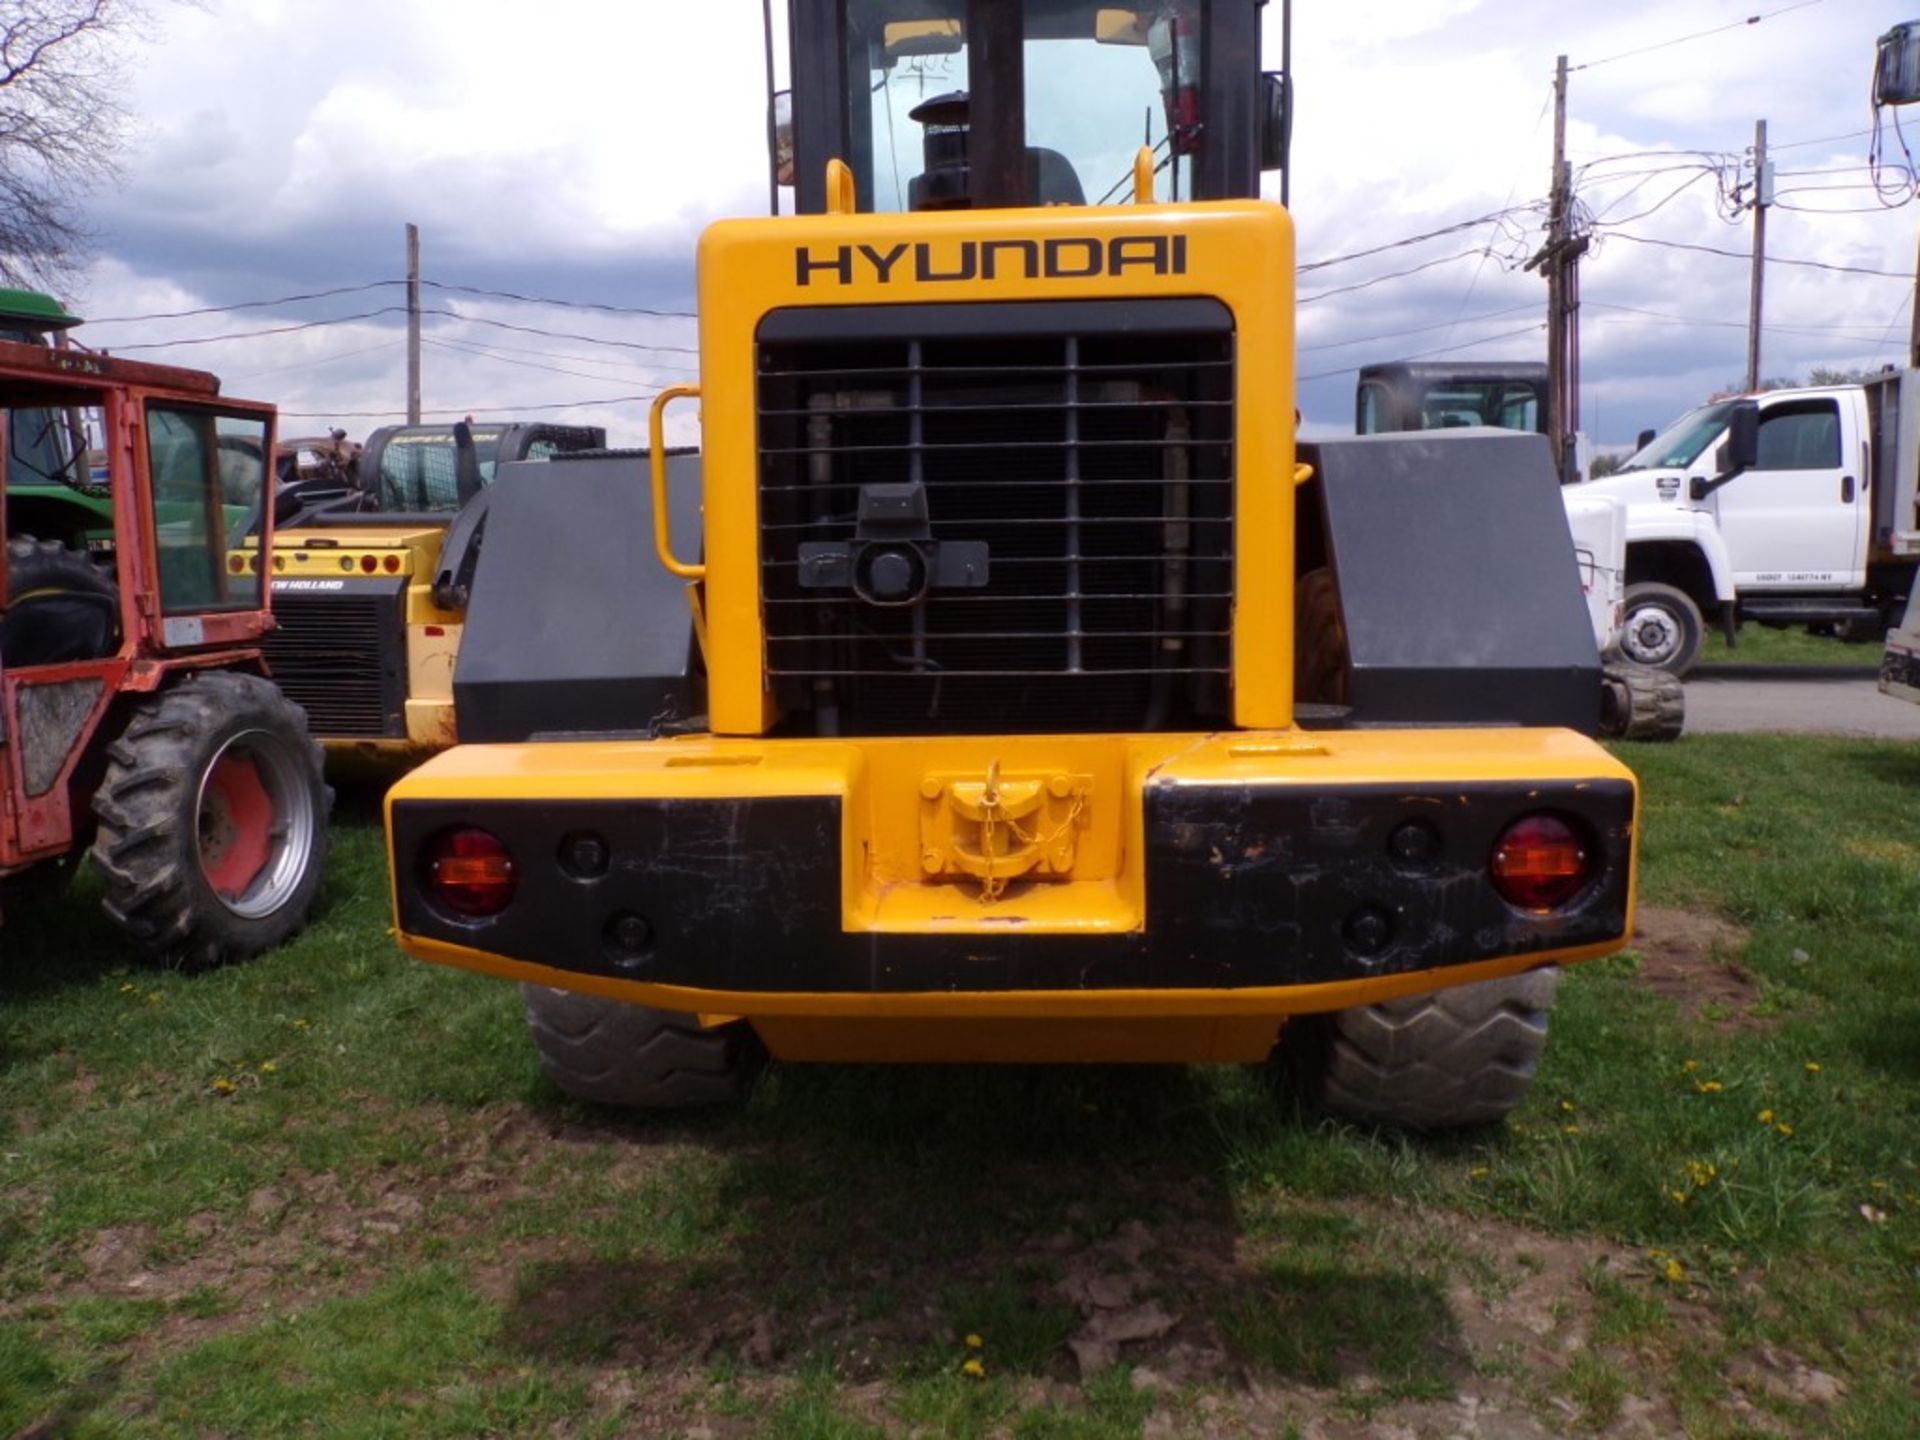 Hyndai HL-740XTD-3 4 WD Loader with JRB Hydraulic Quik Coupler, 2 1/2 Yard Bucket, 20.5-25 Tires, - Image 5 of 6